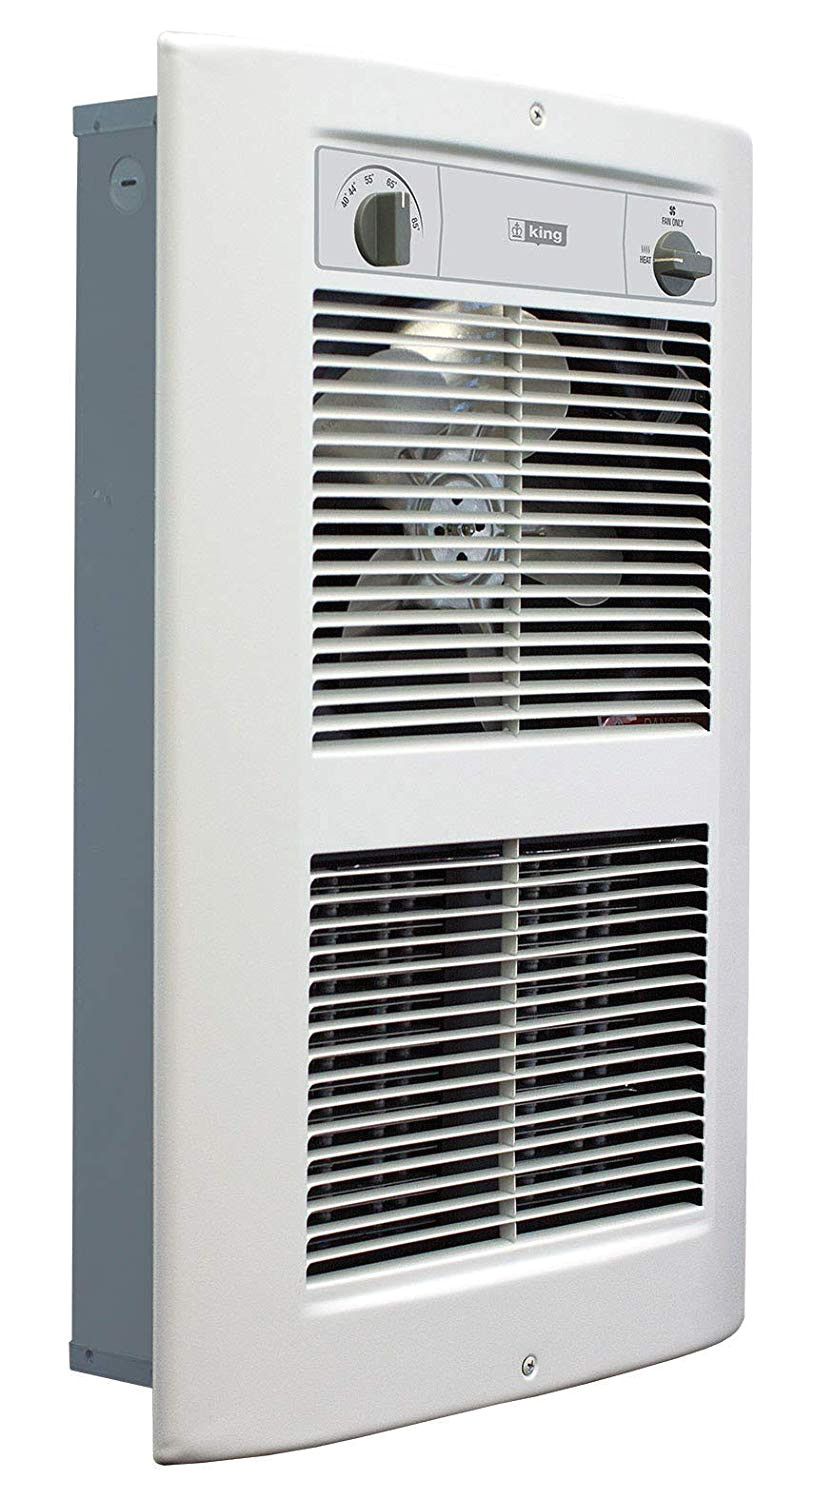 king electric lpw2445t s2 wd r 4500w 240v large pic a watt series 2 decorative wall heater white dove amazon com